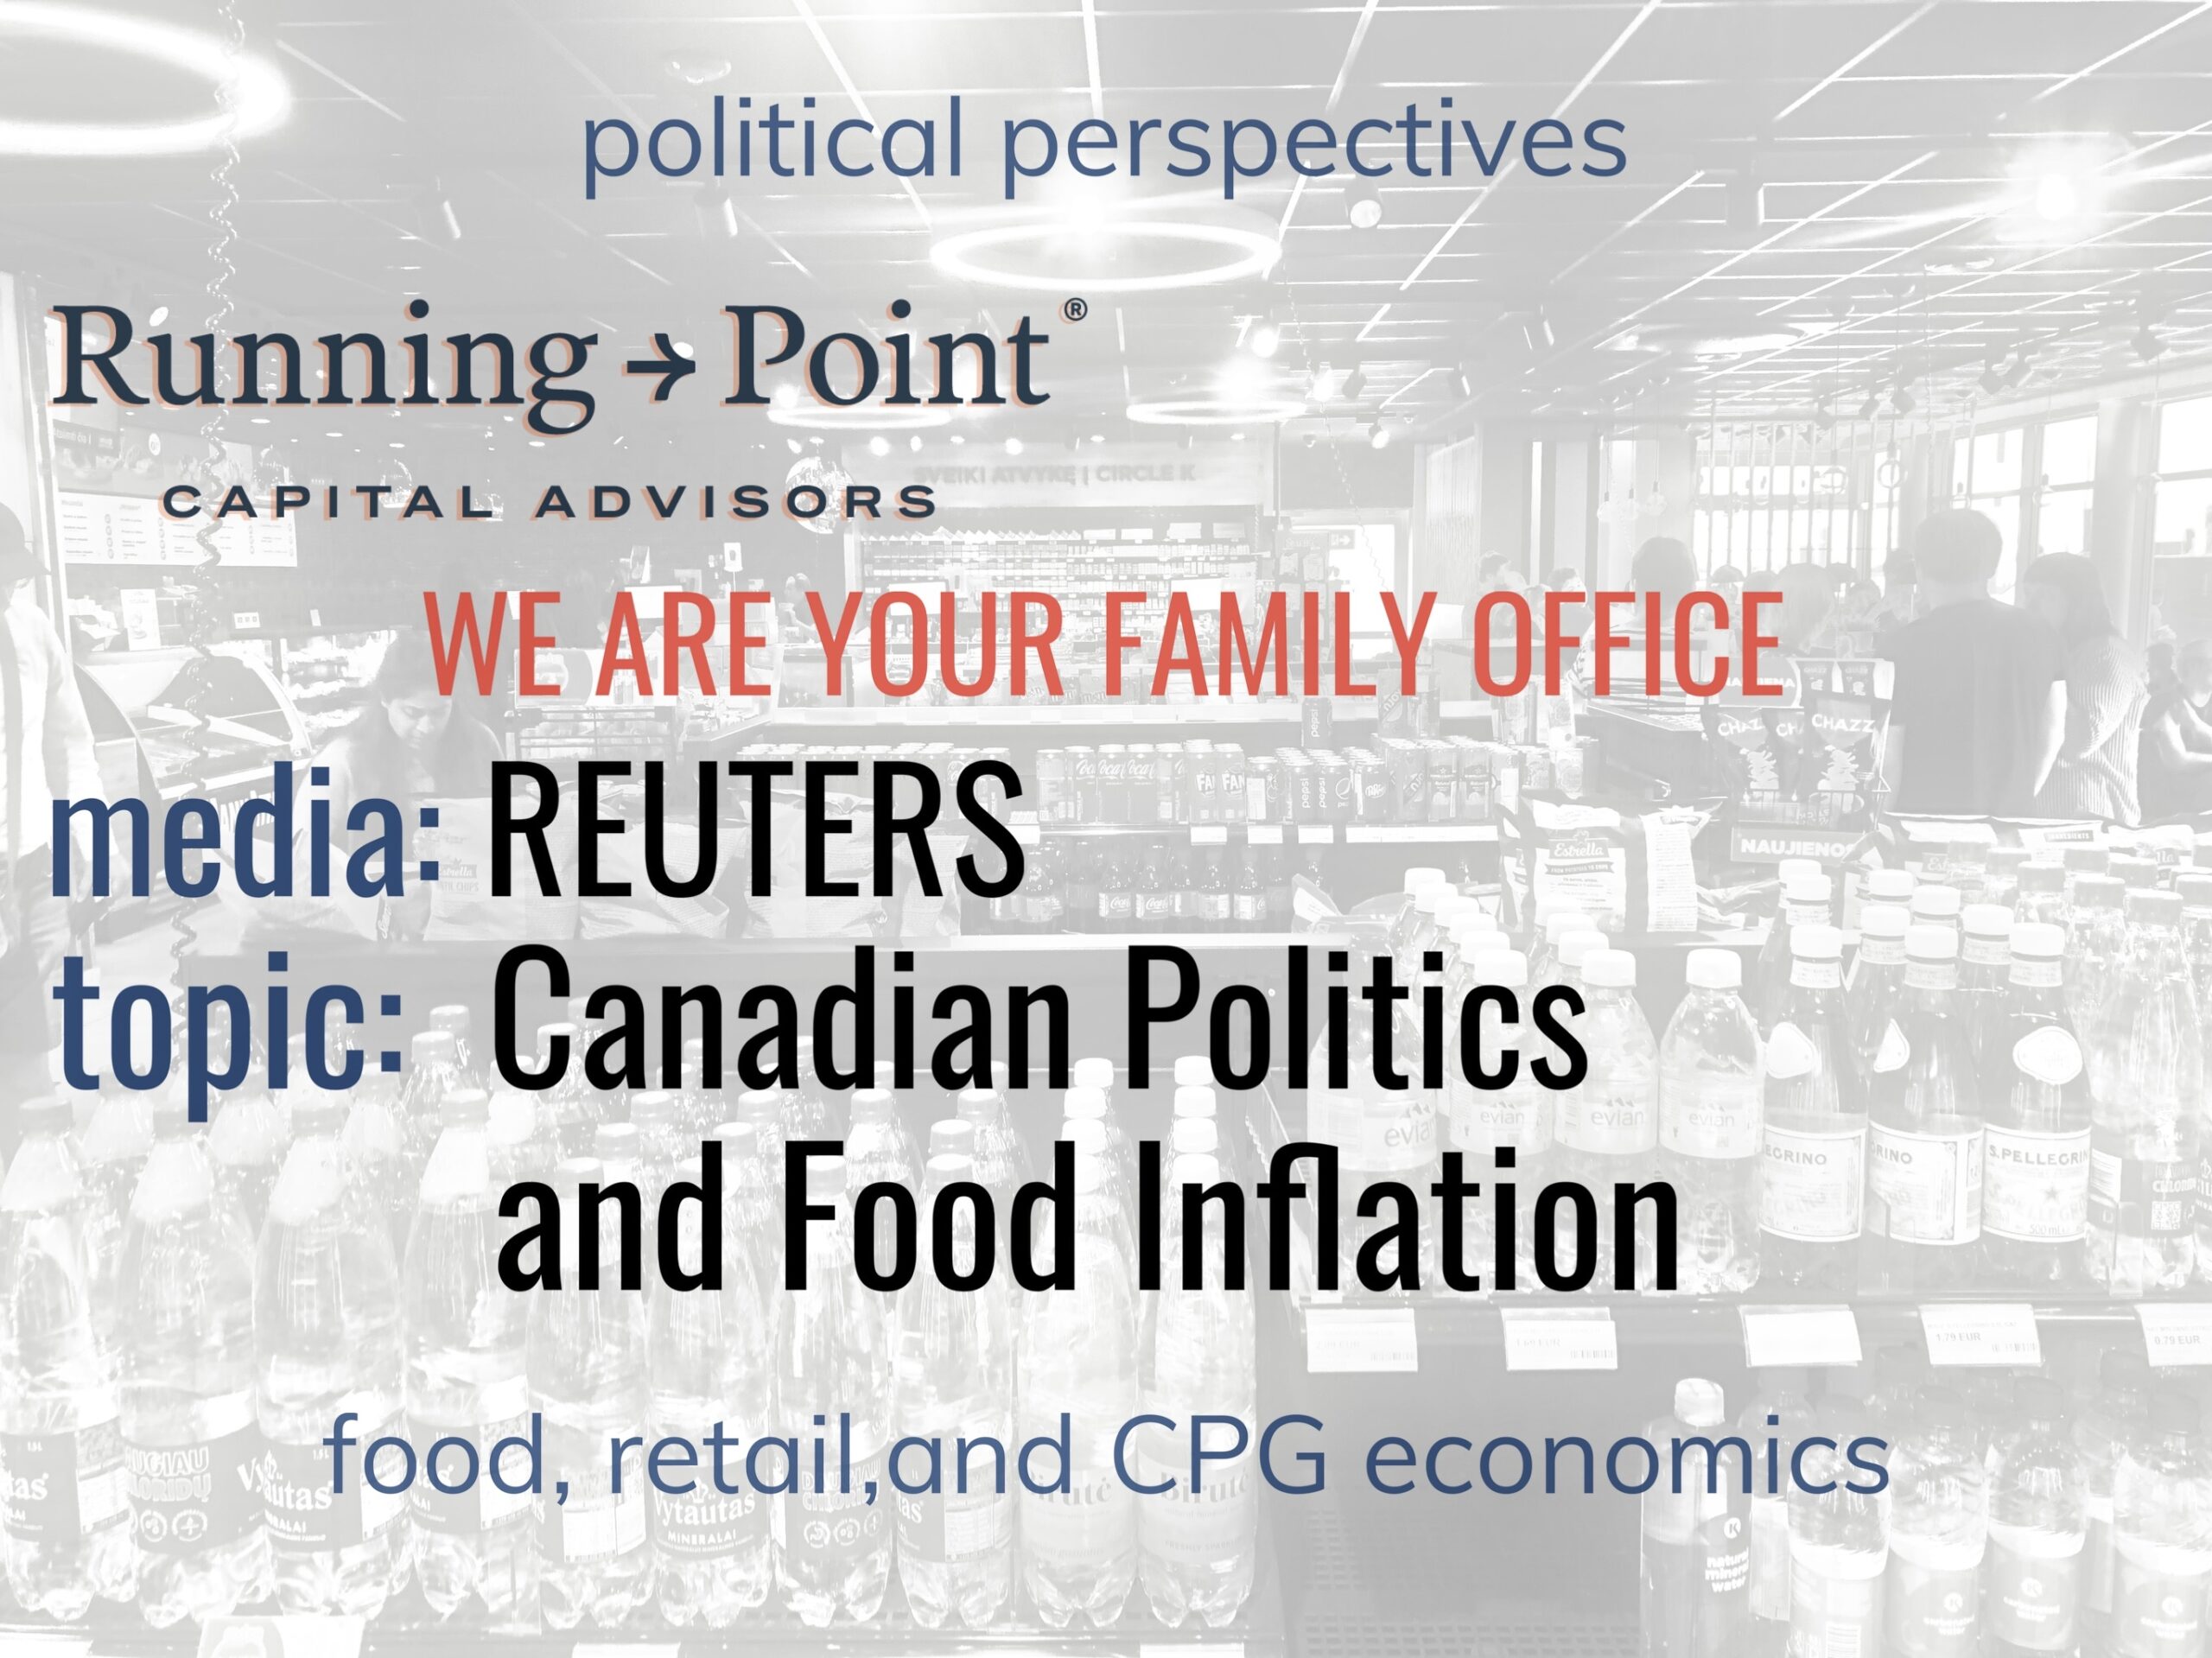 Reuters: Canadian Politics and Inflation